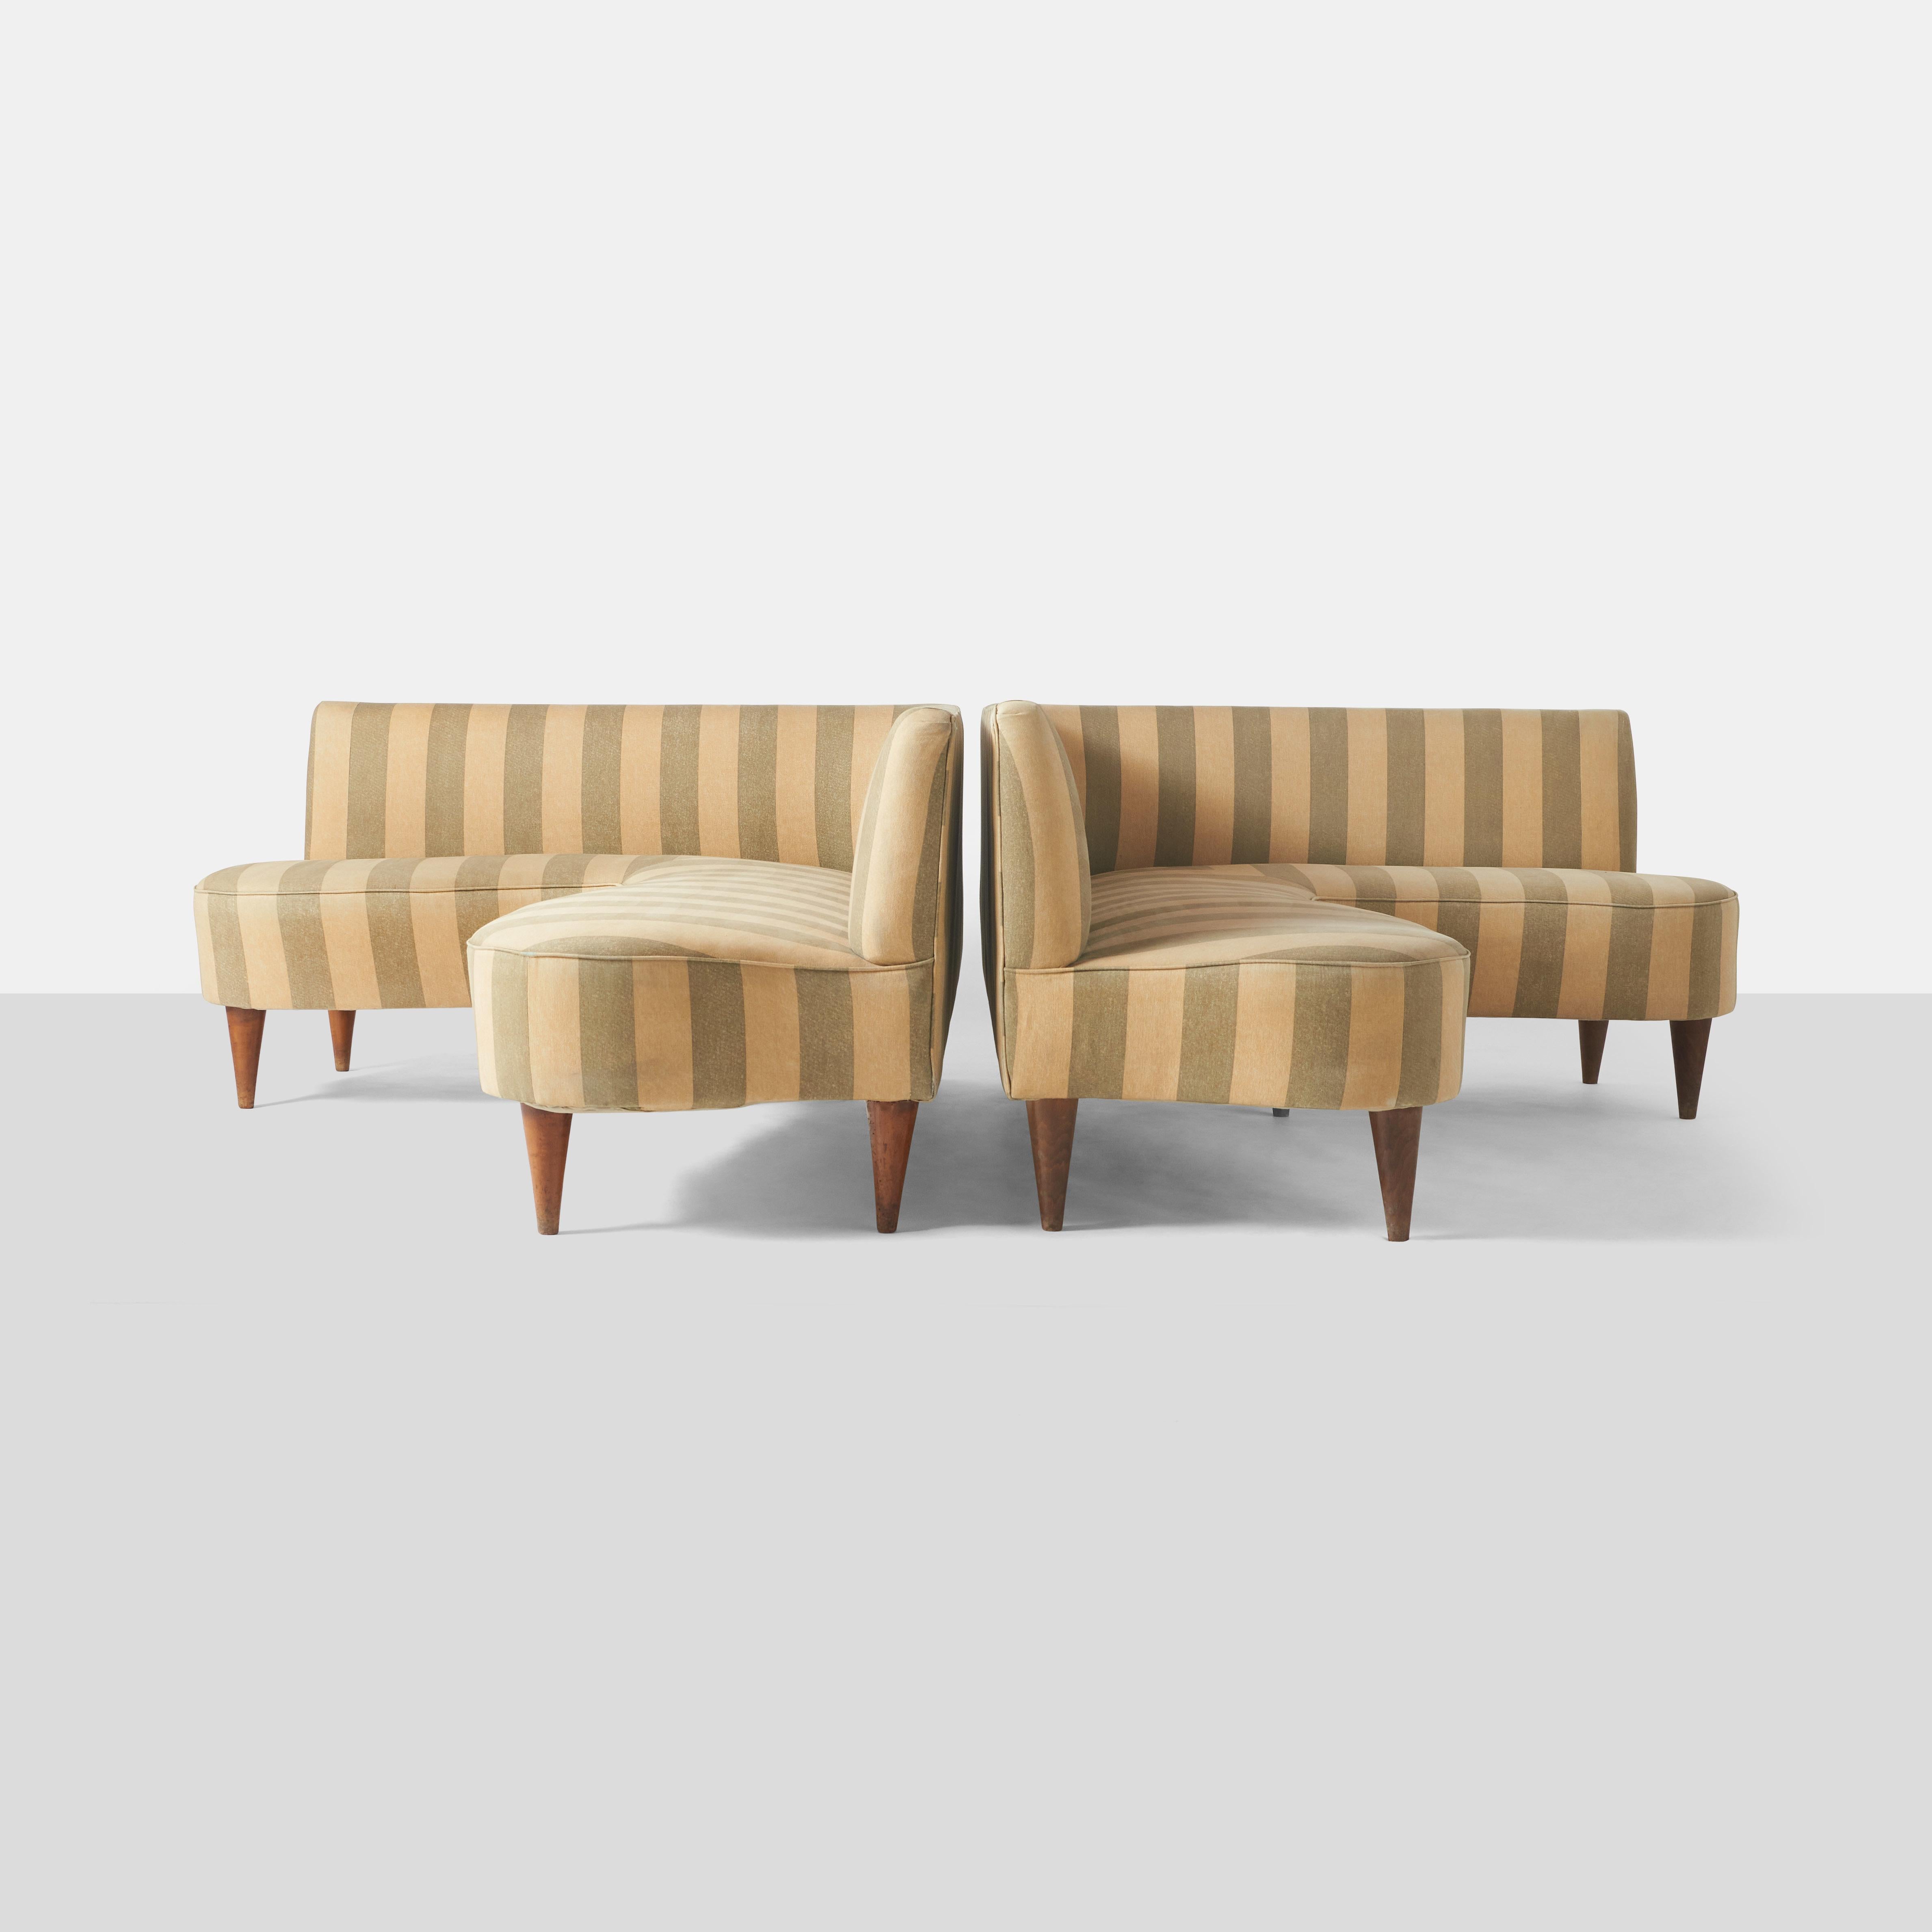 A pair of L shaped sofas, covered in their original fabric, from the 50s.